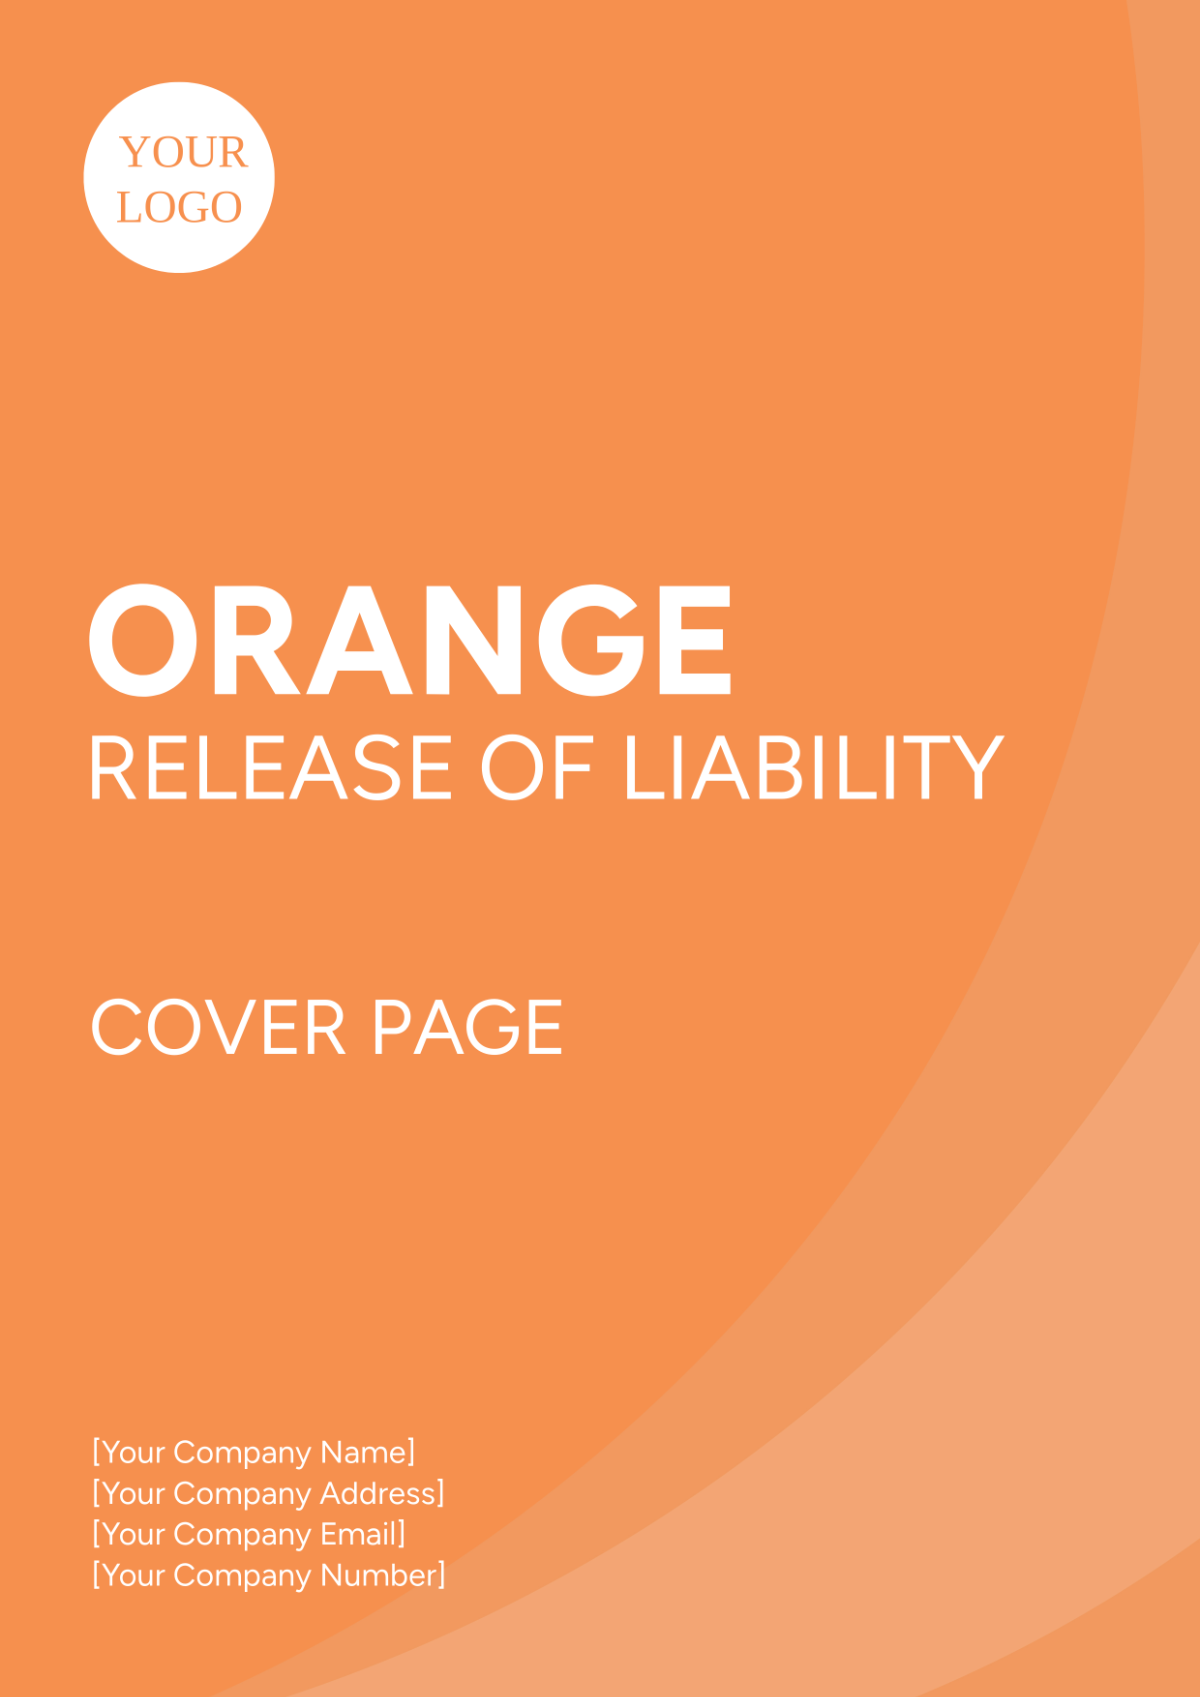 Orange Release of Liability Cover Page